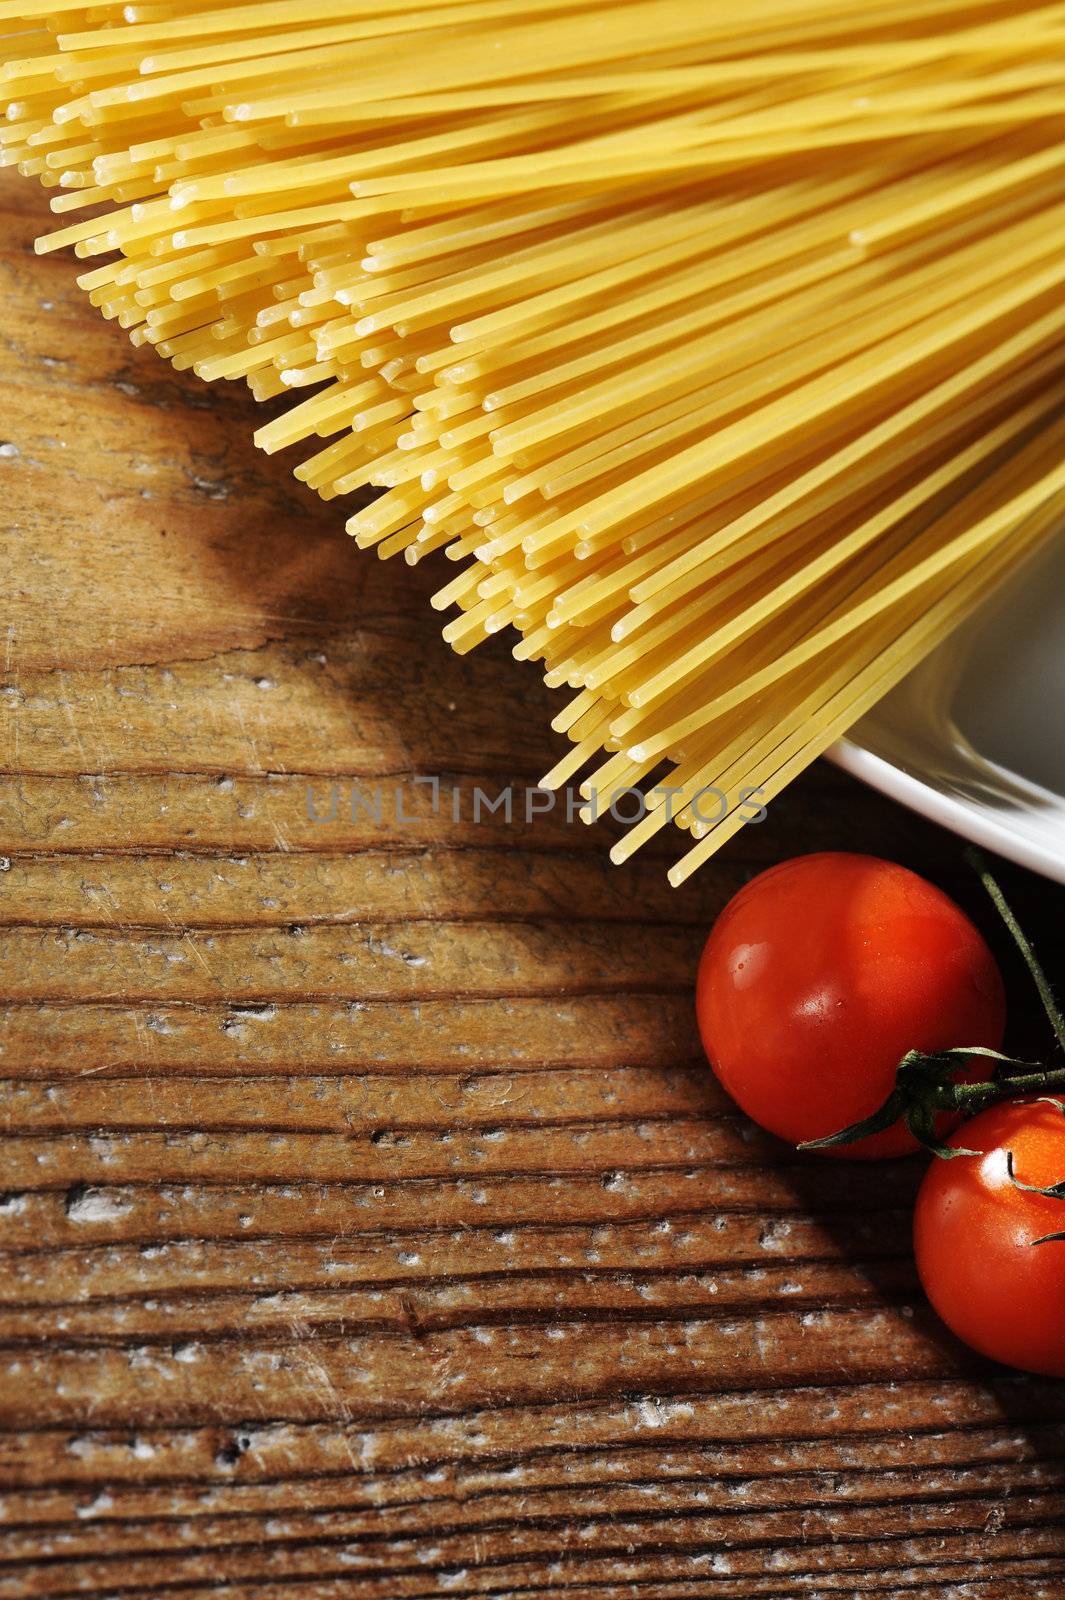 uncooked spaghetti noodles by stokkete